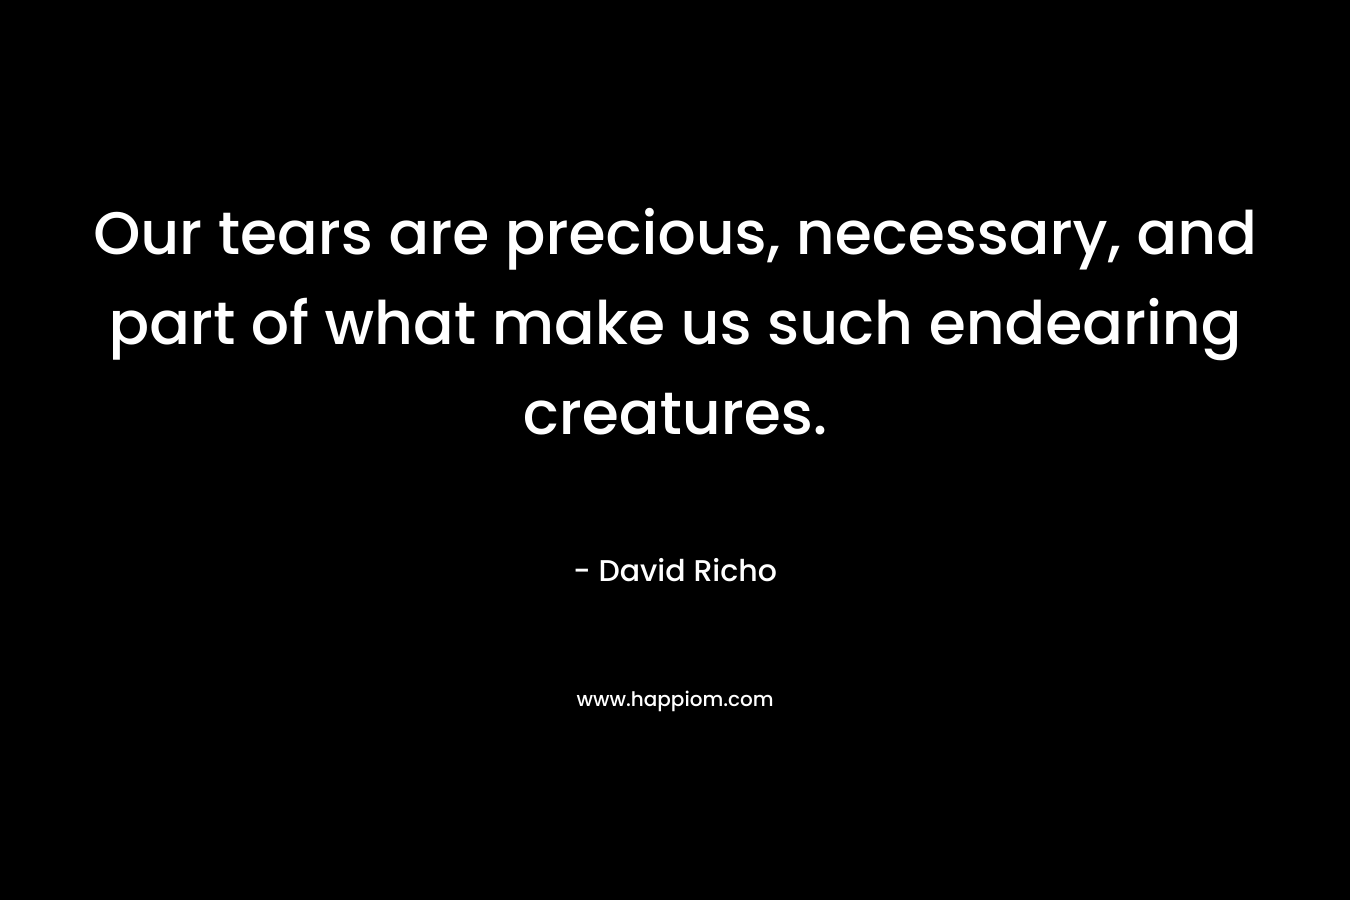 Our tears are precious, necessary, and part of what make us such endearing creatures. – David Richo